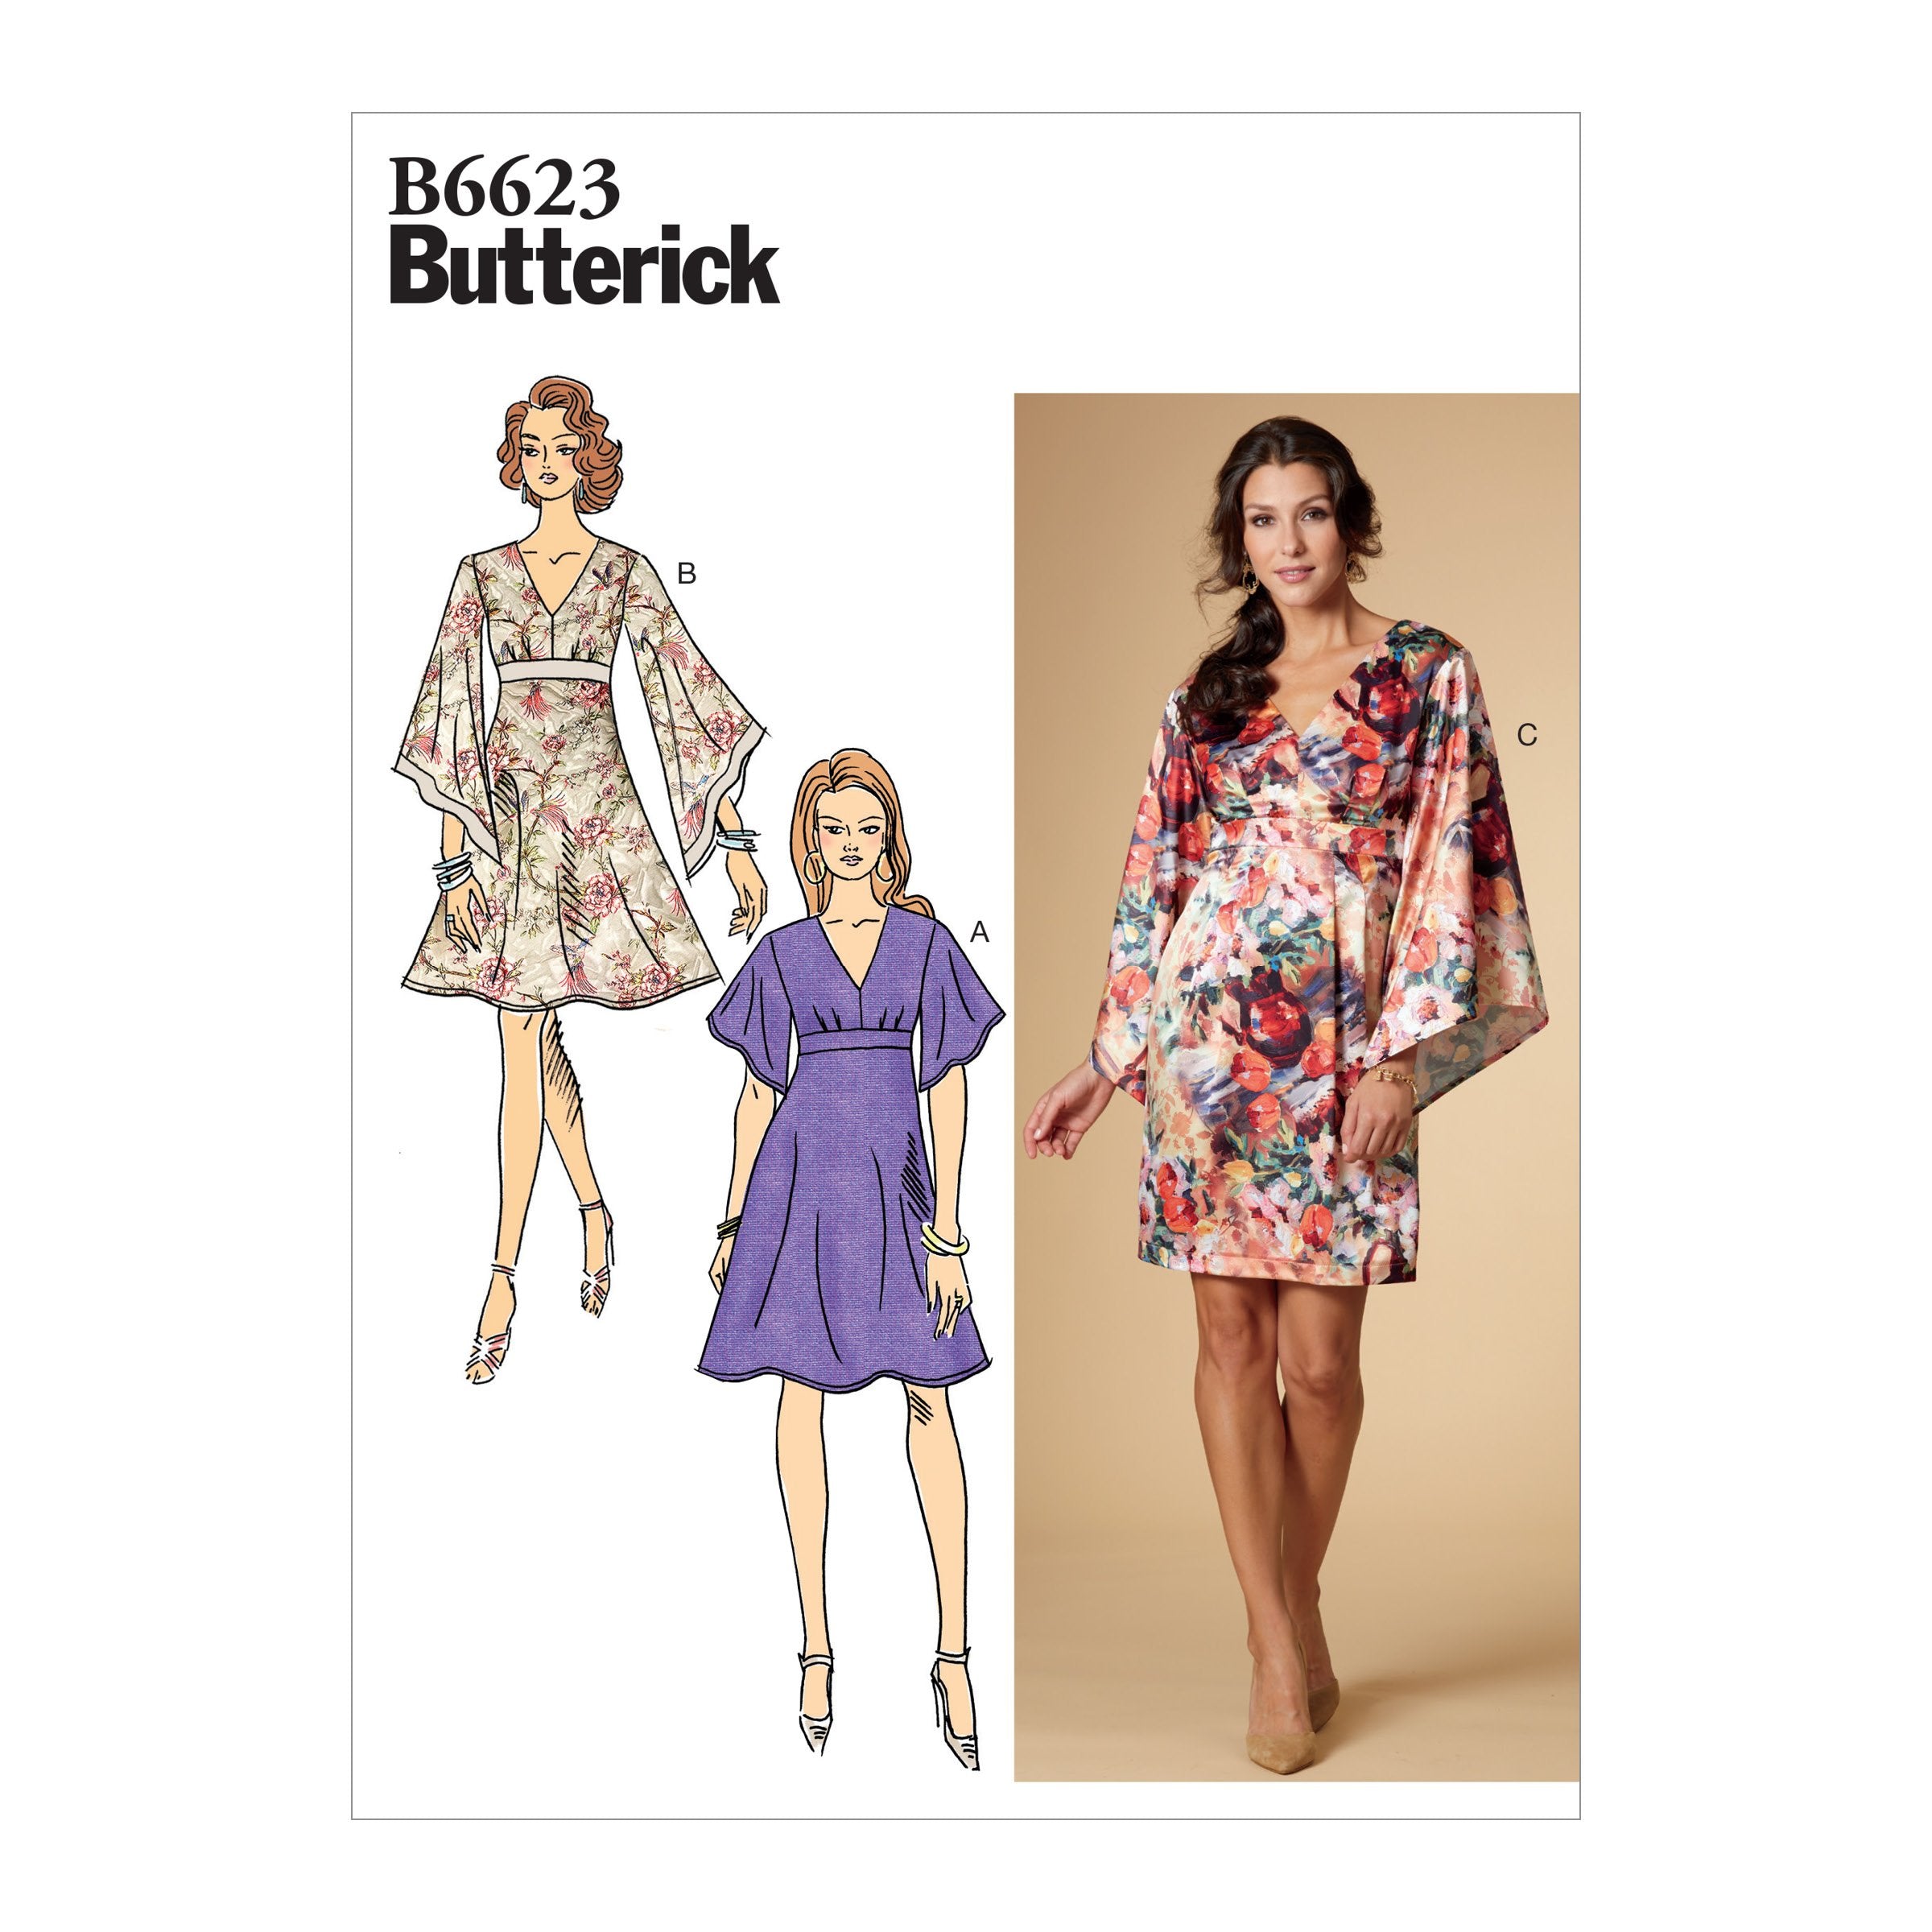 Butterick B6623 Misses' Dress sewing pattern from Jaycotts Sewing Supplies